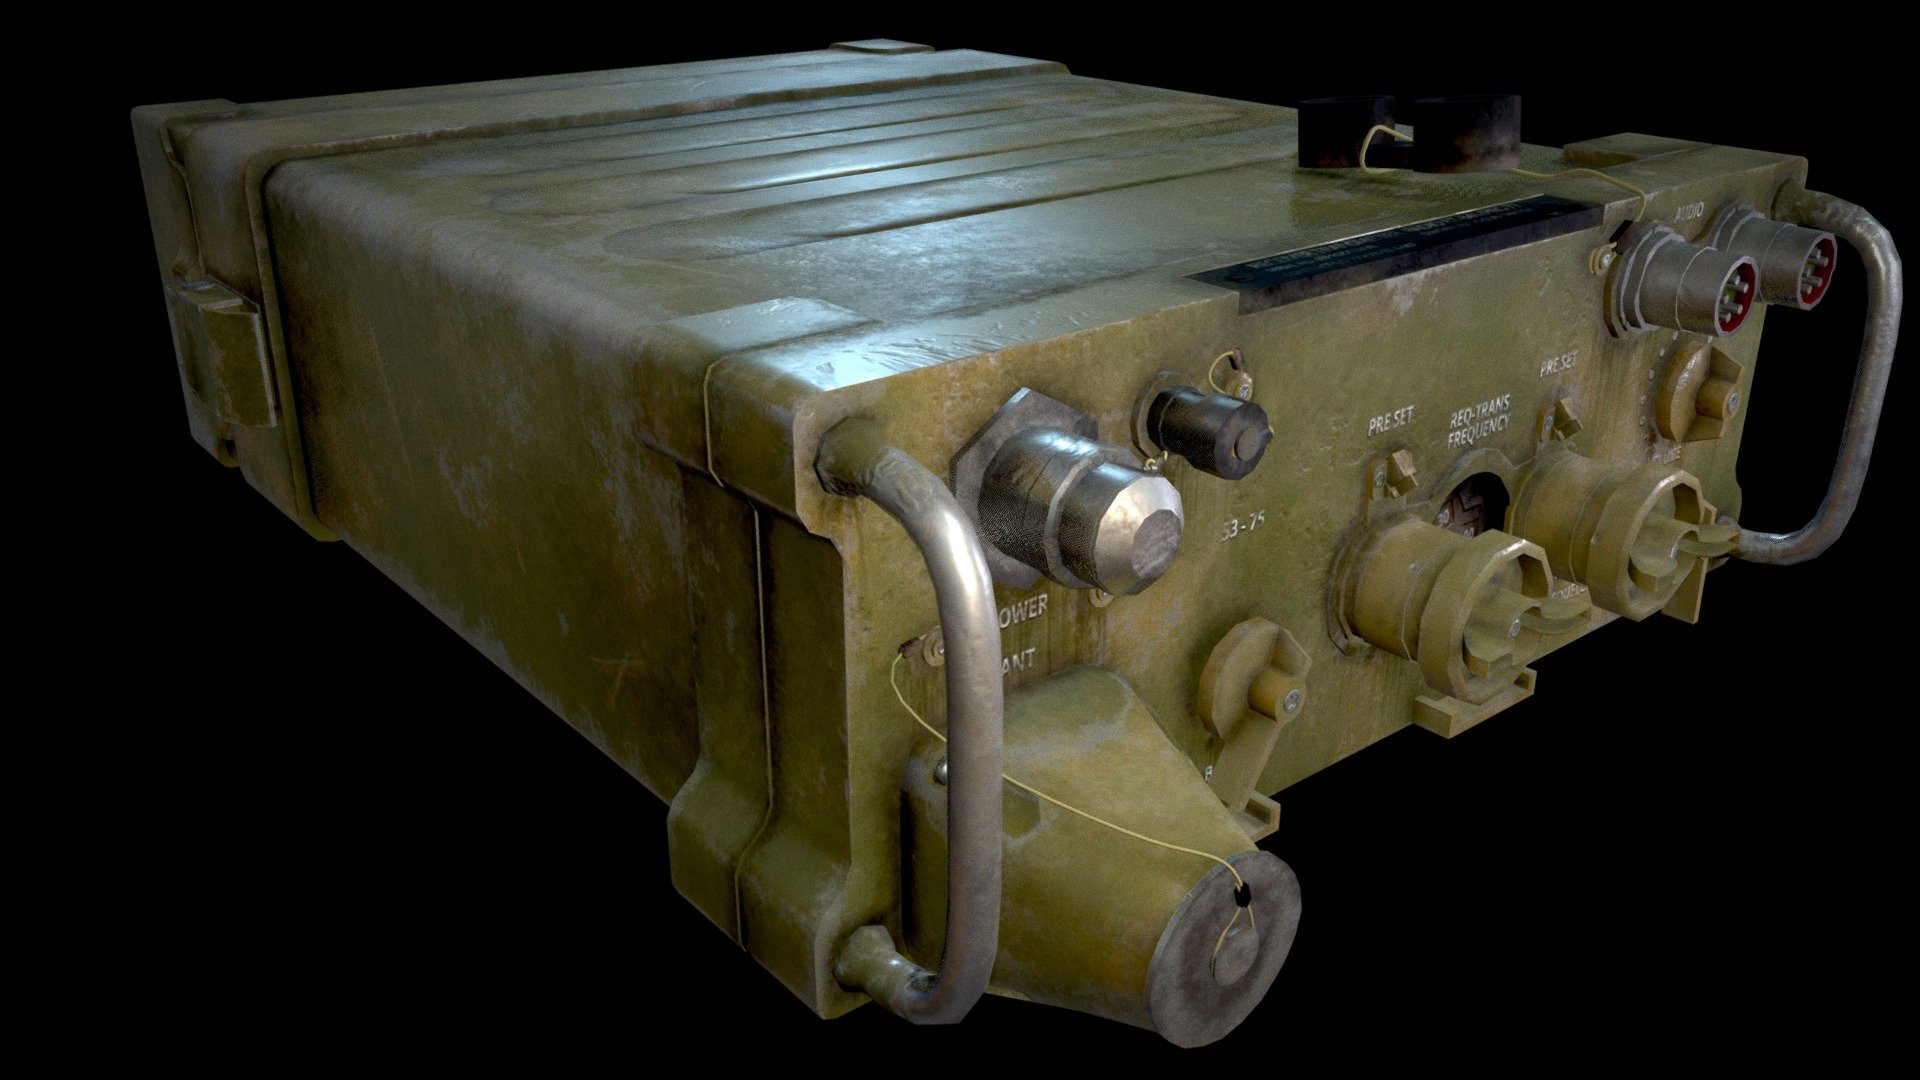 A PRC-77 Radio Transmitter introduced in the Vietnam war and extensively used until the 1990s 3d model